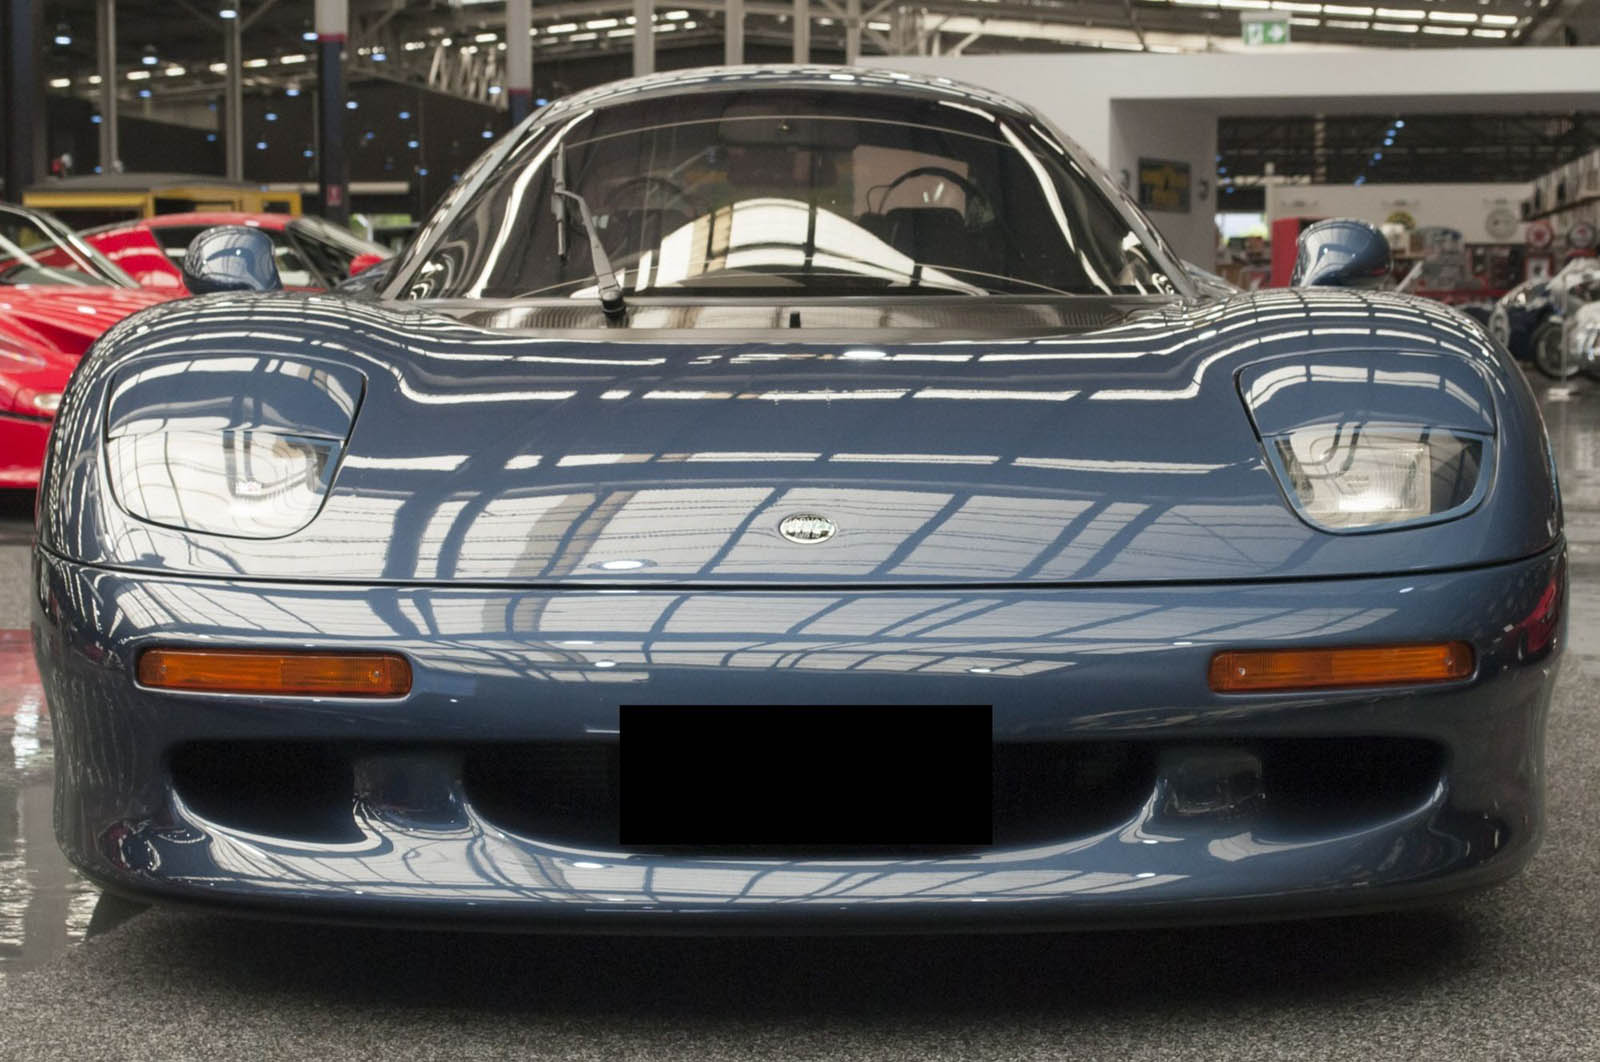 1991 Jaguar XJR-15 Could Be The British Supercar You've Been Waiting For